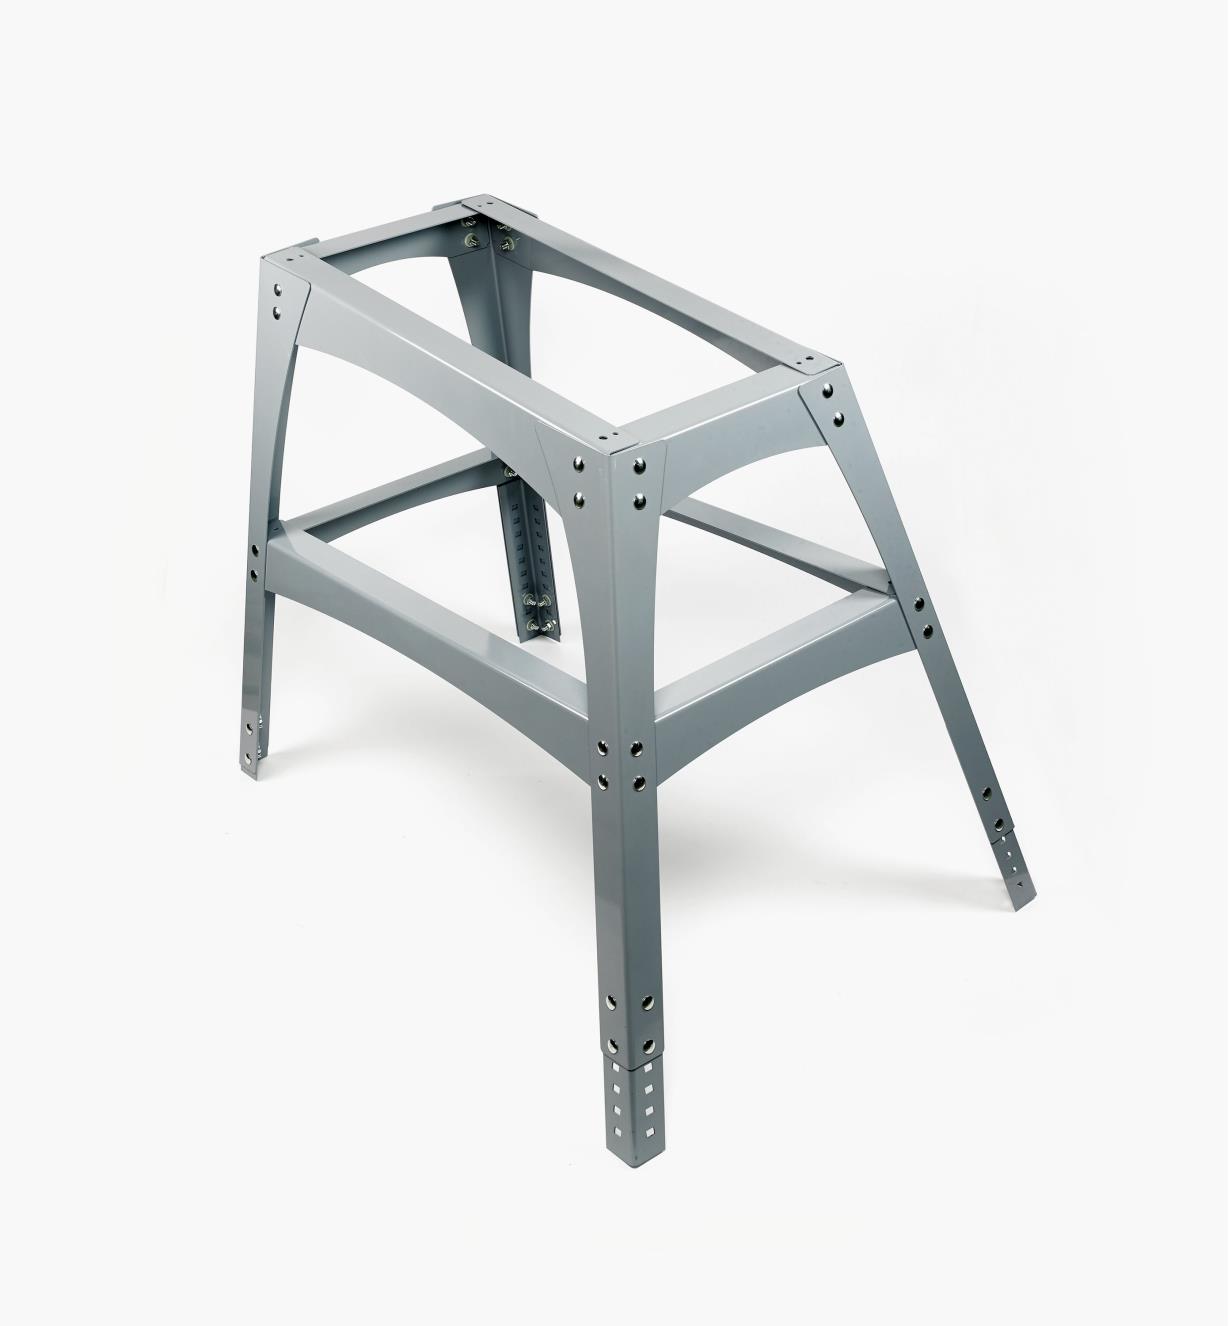 17N1702 - Stand for Bridge City Jointmaker Pro